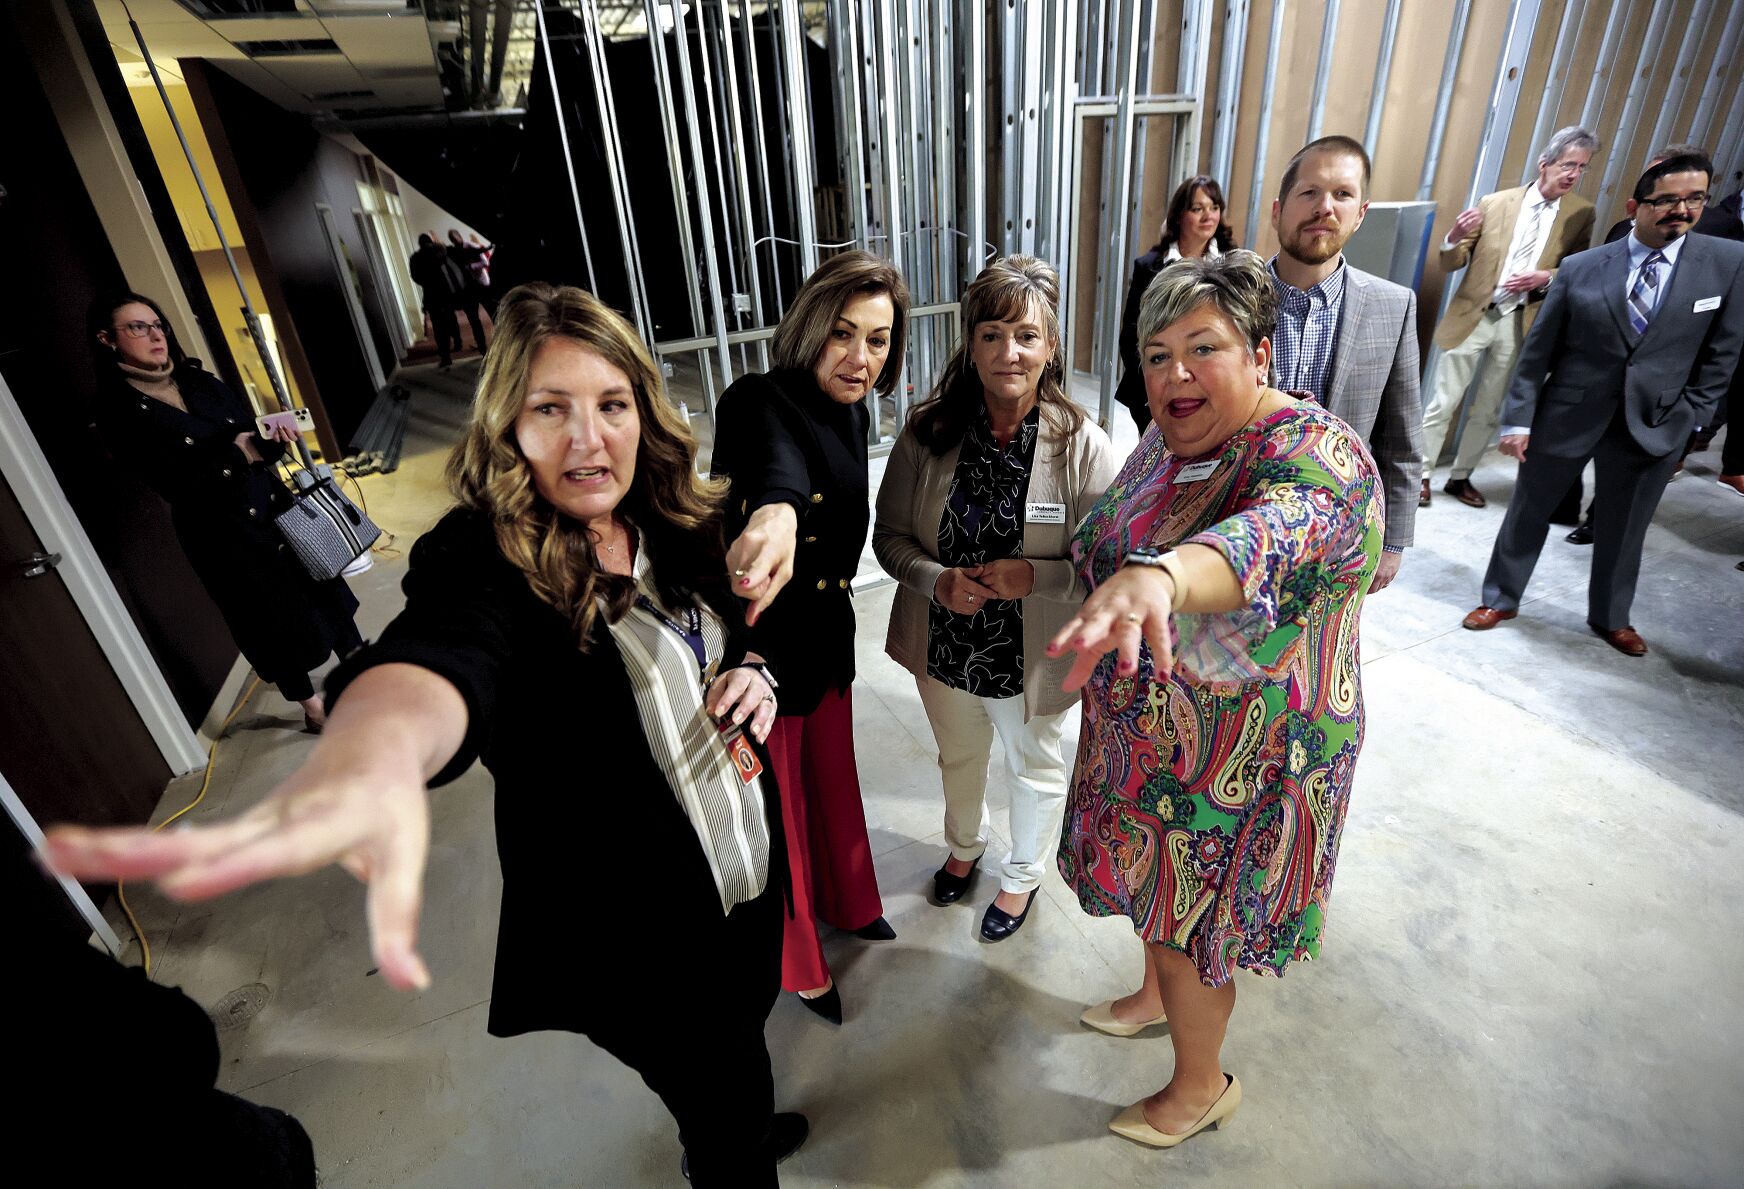 Dubuque Community Schools staff members Brenda Duvel (left), Lisa TeBockhorst (second from right) and Superintendent Amy Hawkins (right) give the governor a tour of the planned Seedlings Preschool Center on Chavenelle Road.    PHOTO CREDIT: Dave Kettering